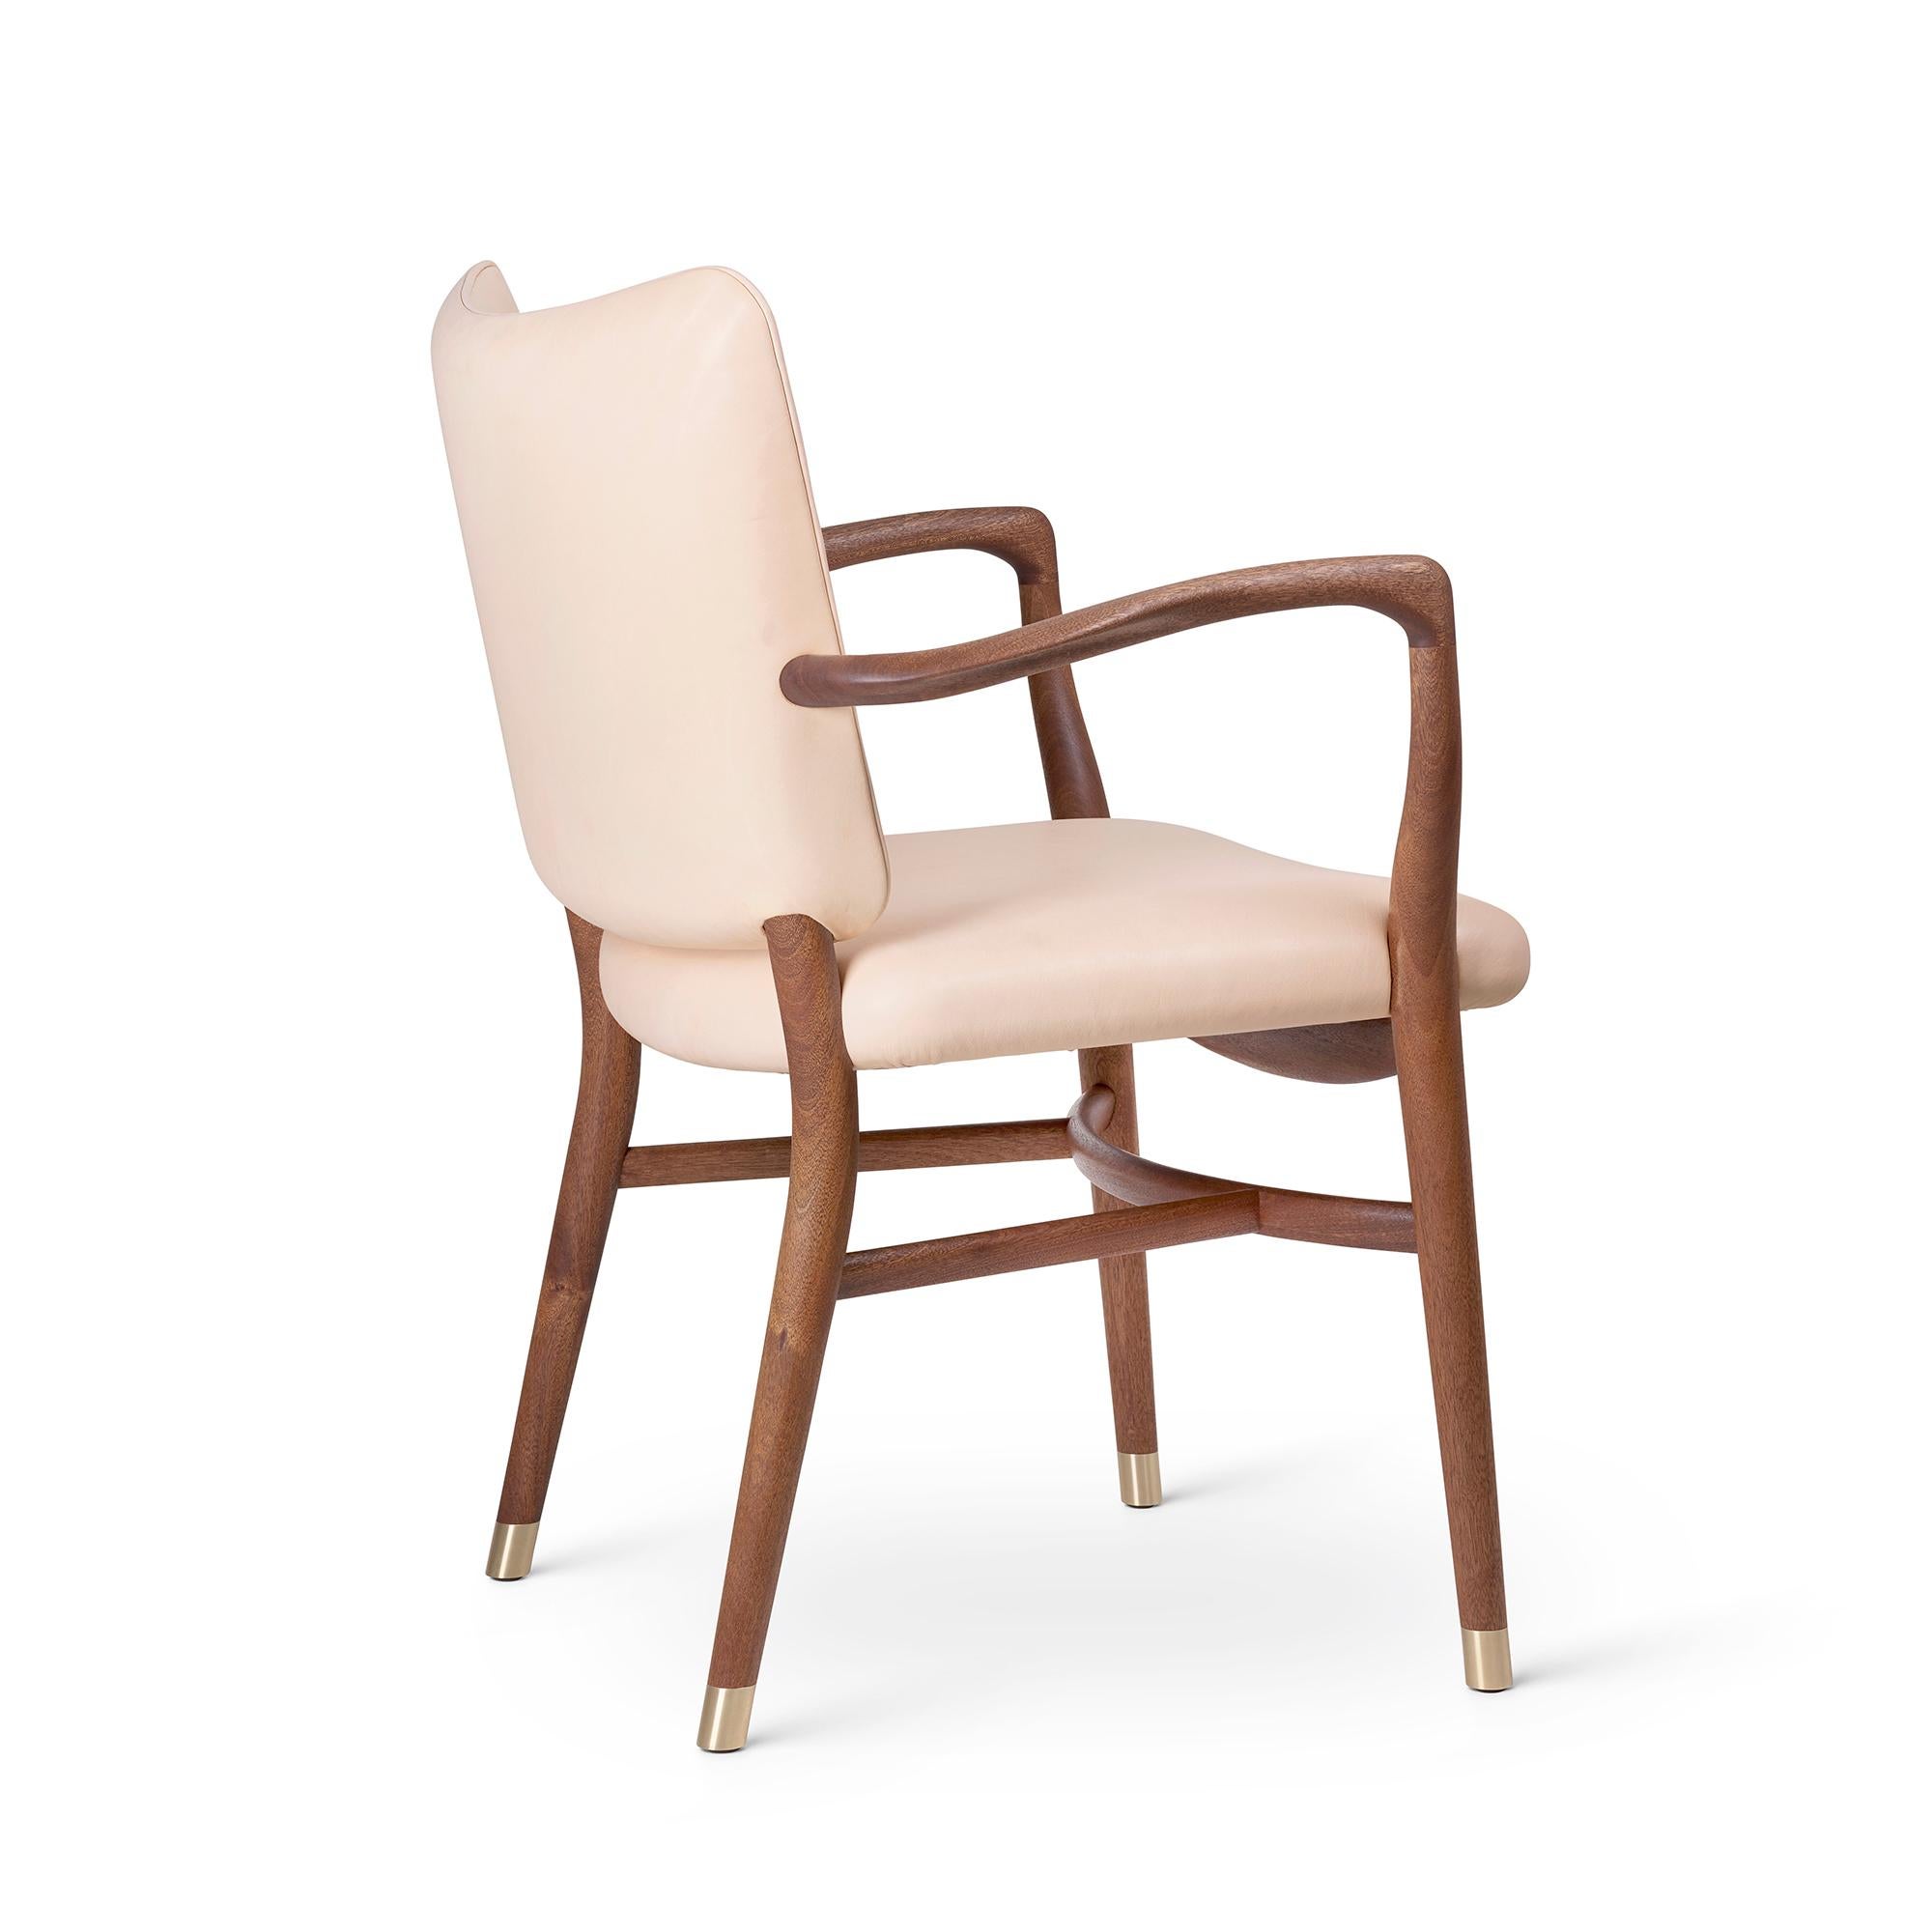 Vilhelm Lauritzen 'VLA61' Chair in Mahogany and Leather for Carl Hansen & Son In New Condition For Sale In Glendale, CA